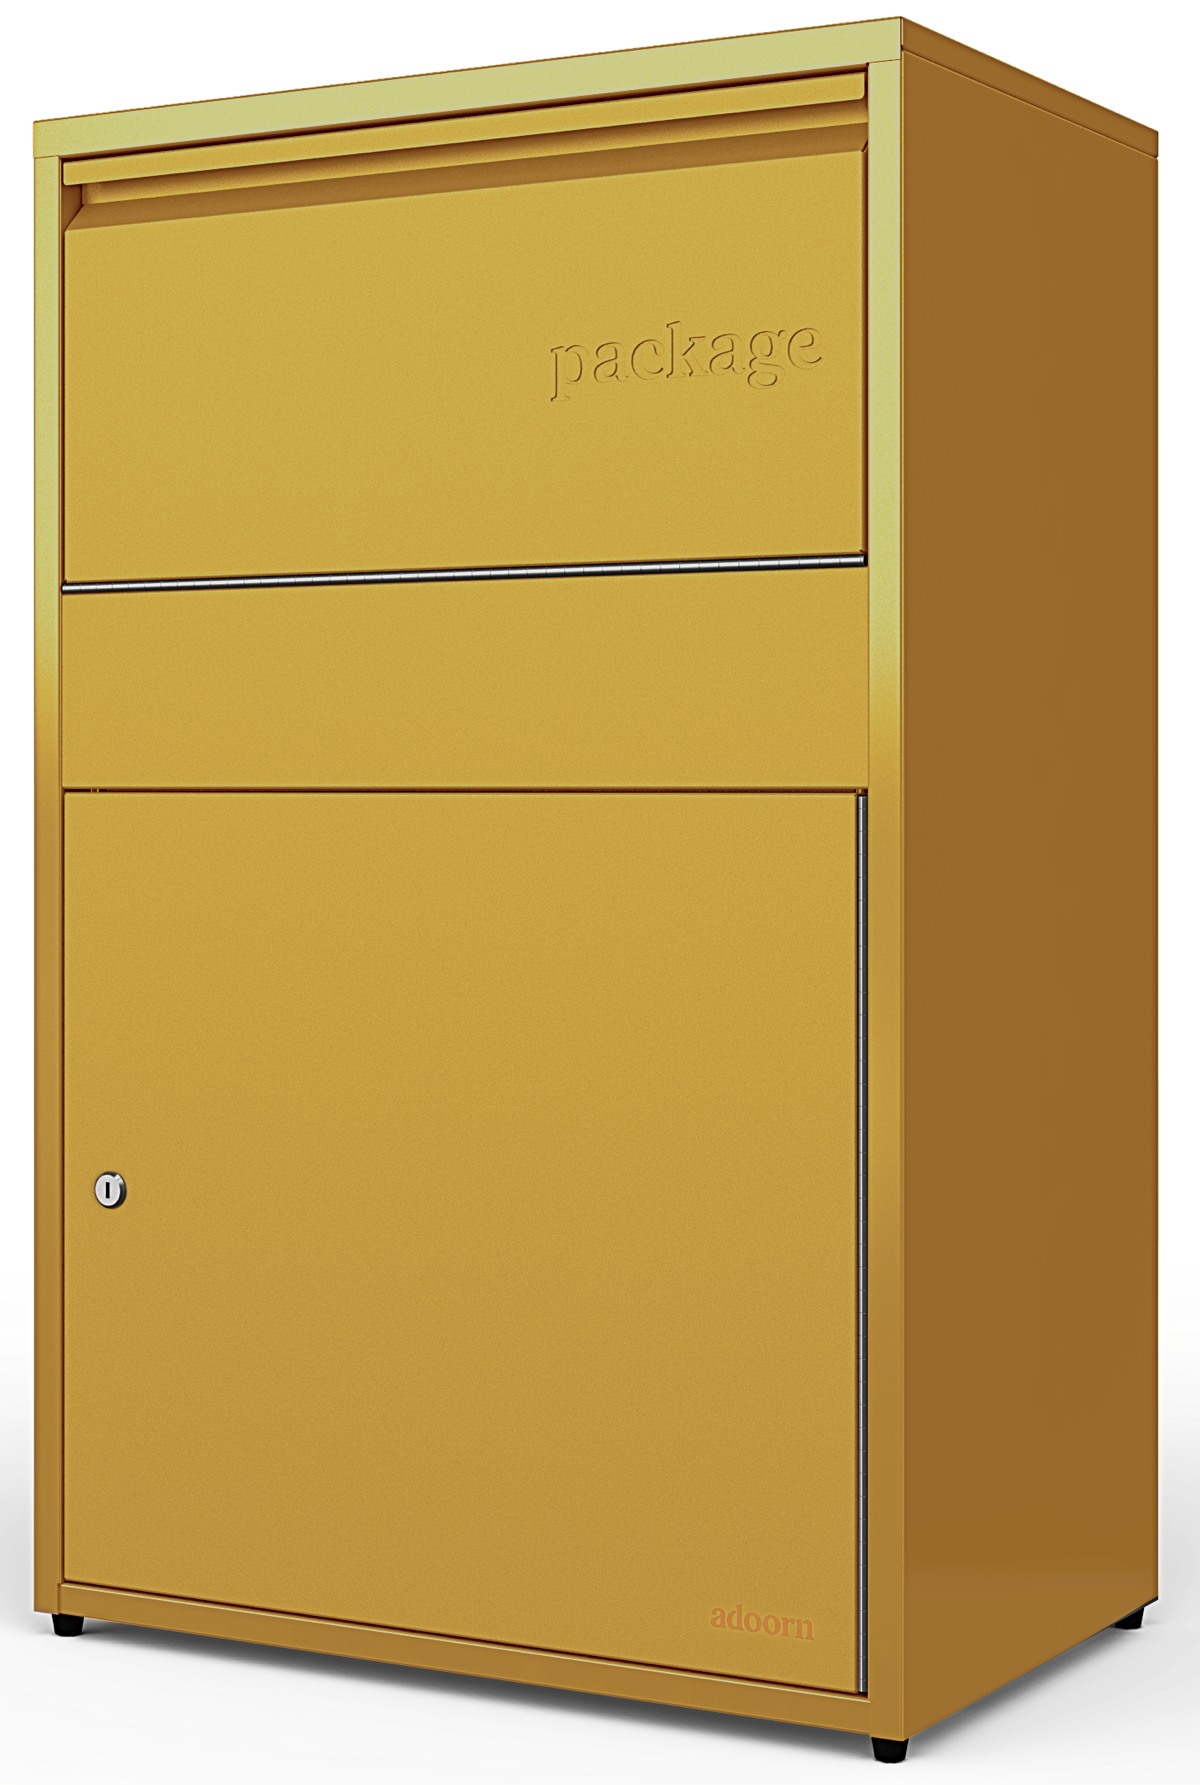 Modern Package Box Specifications